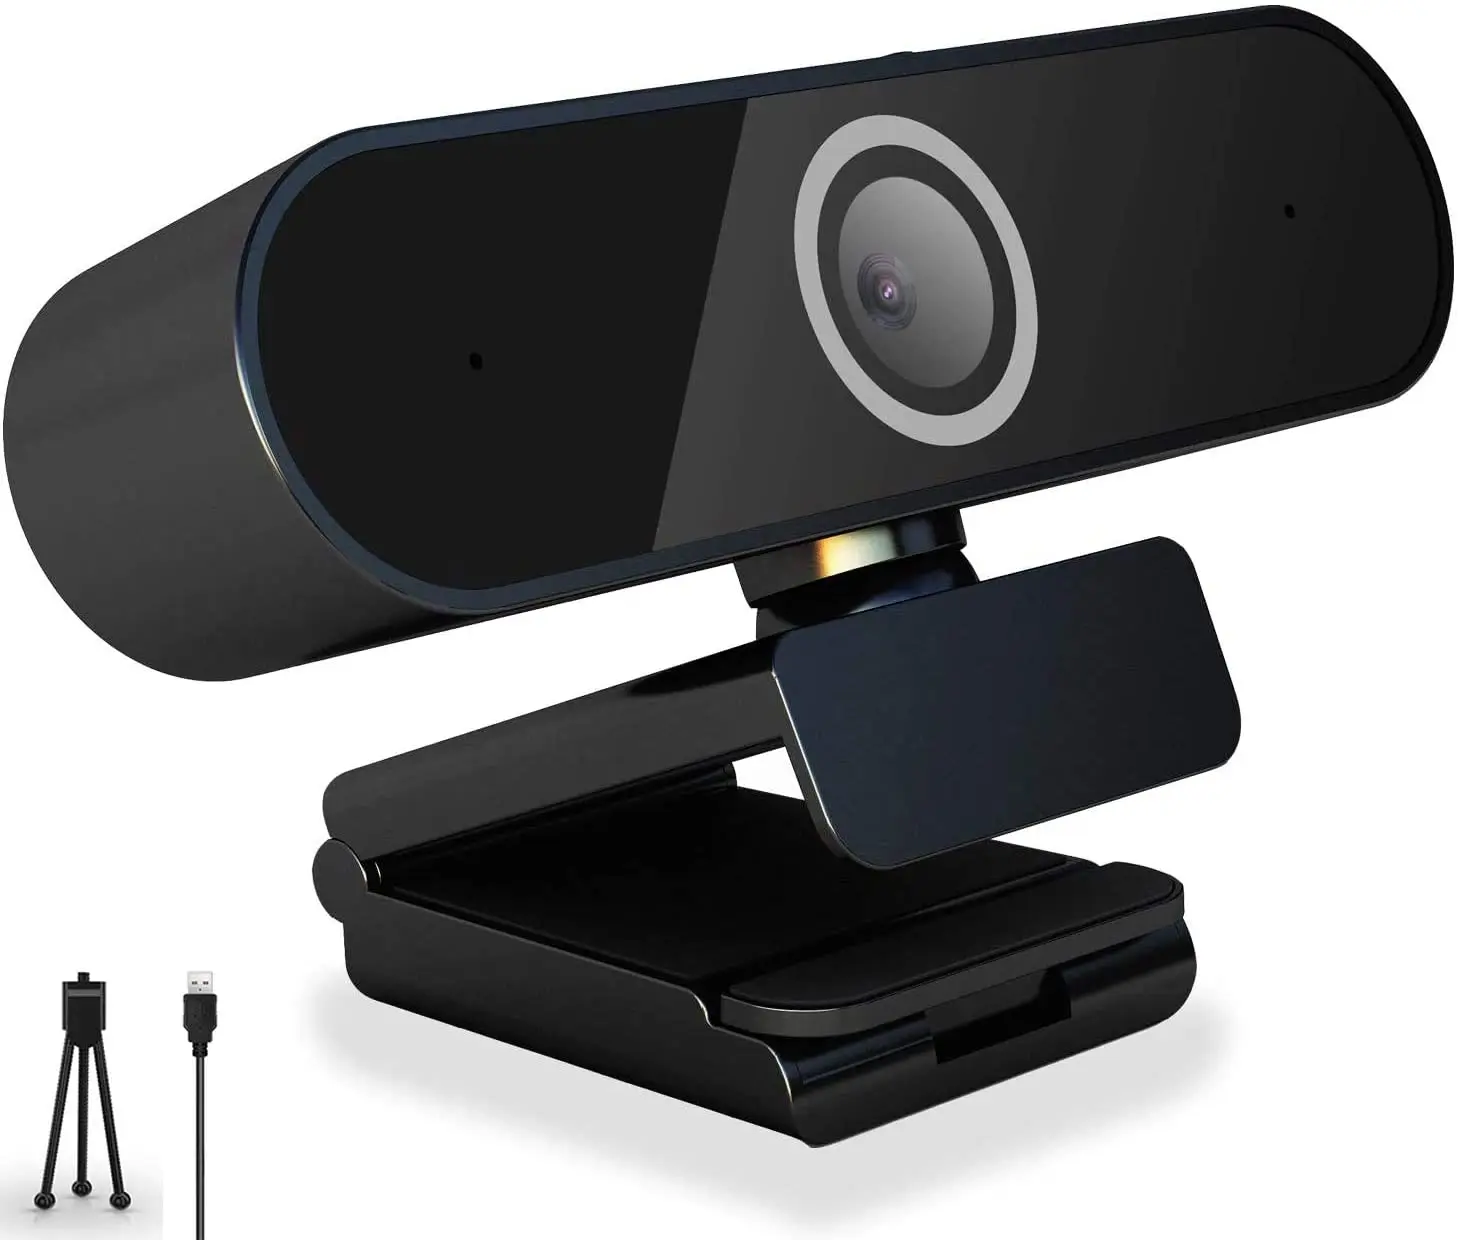 1080P 8MP Webcam with Microphone Desktop or Laptop, Streaming Webcam for Computer, USB Web Camera Built-in Mic, webcam 1080P